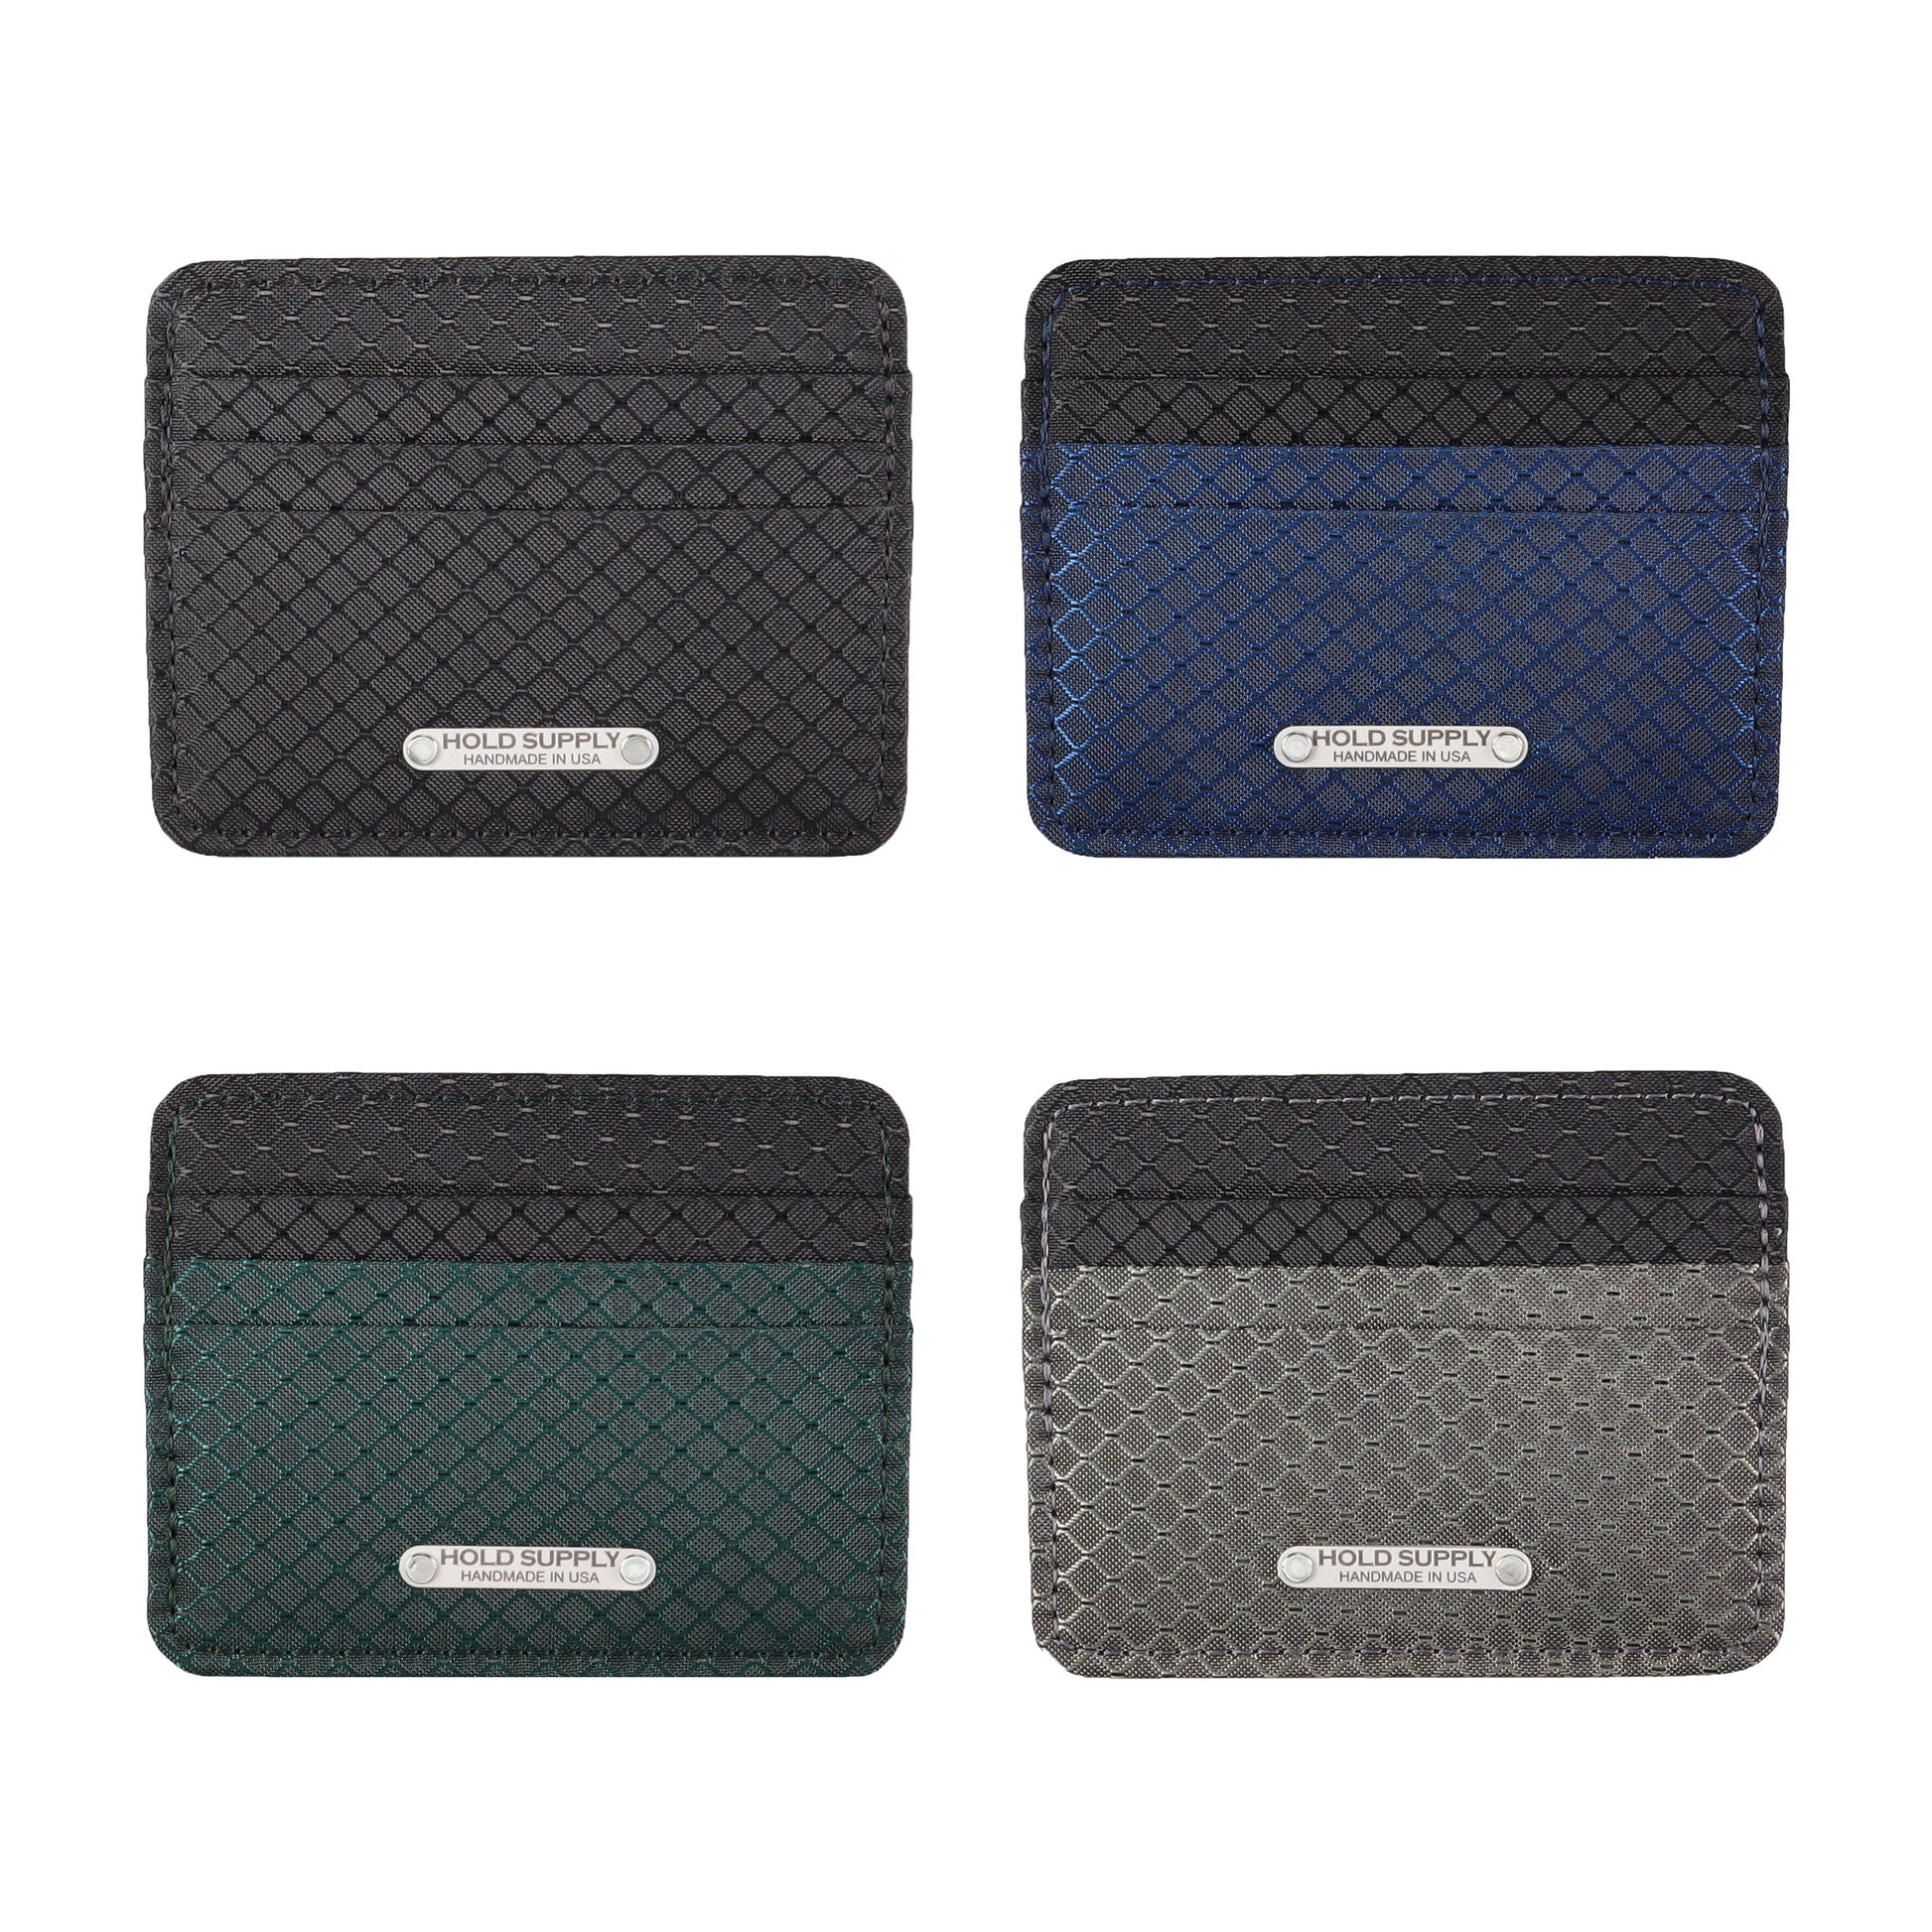 Navy Blue and Black Ripstop Card Holder Wallet